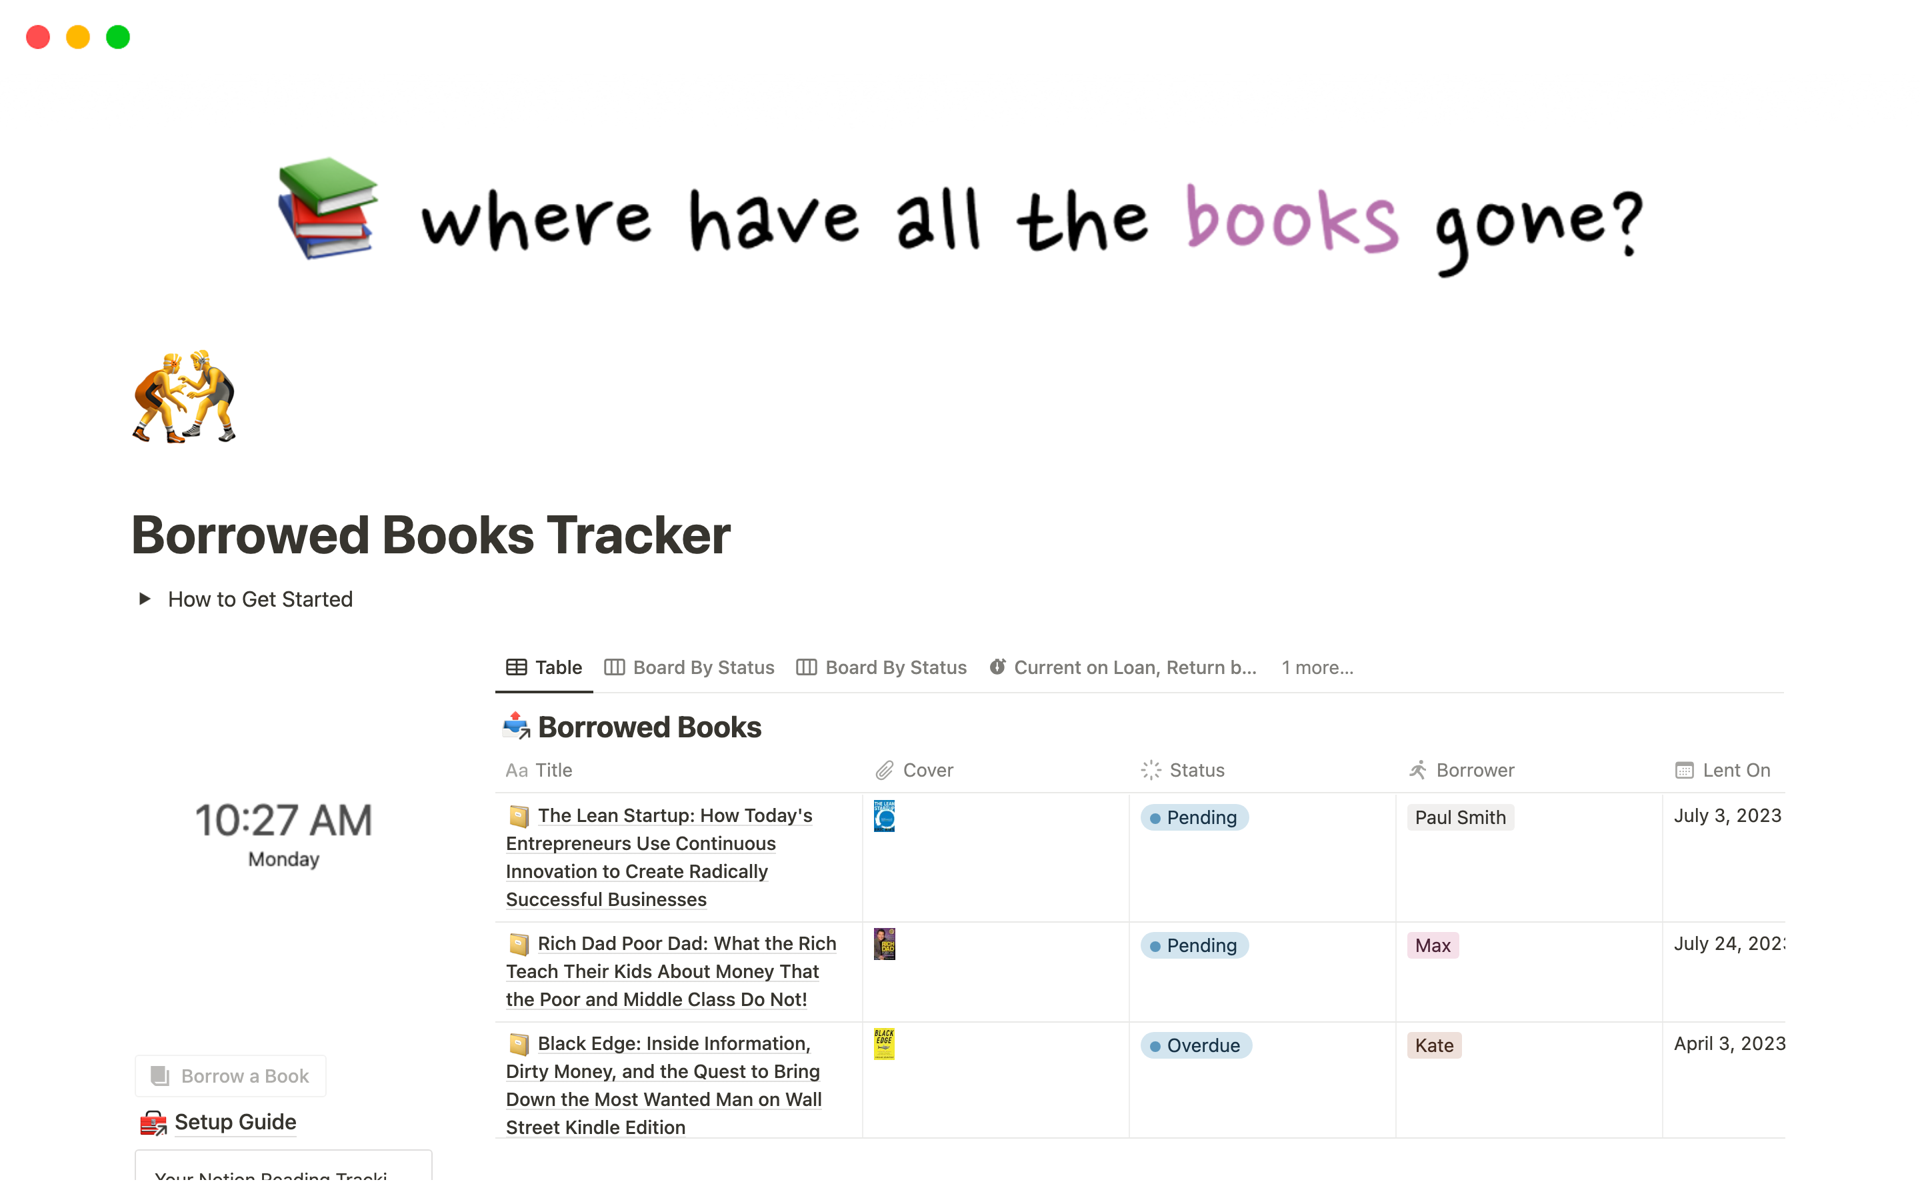 Don't forget who owe's you what book, track it to keep an eye on your distributed library